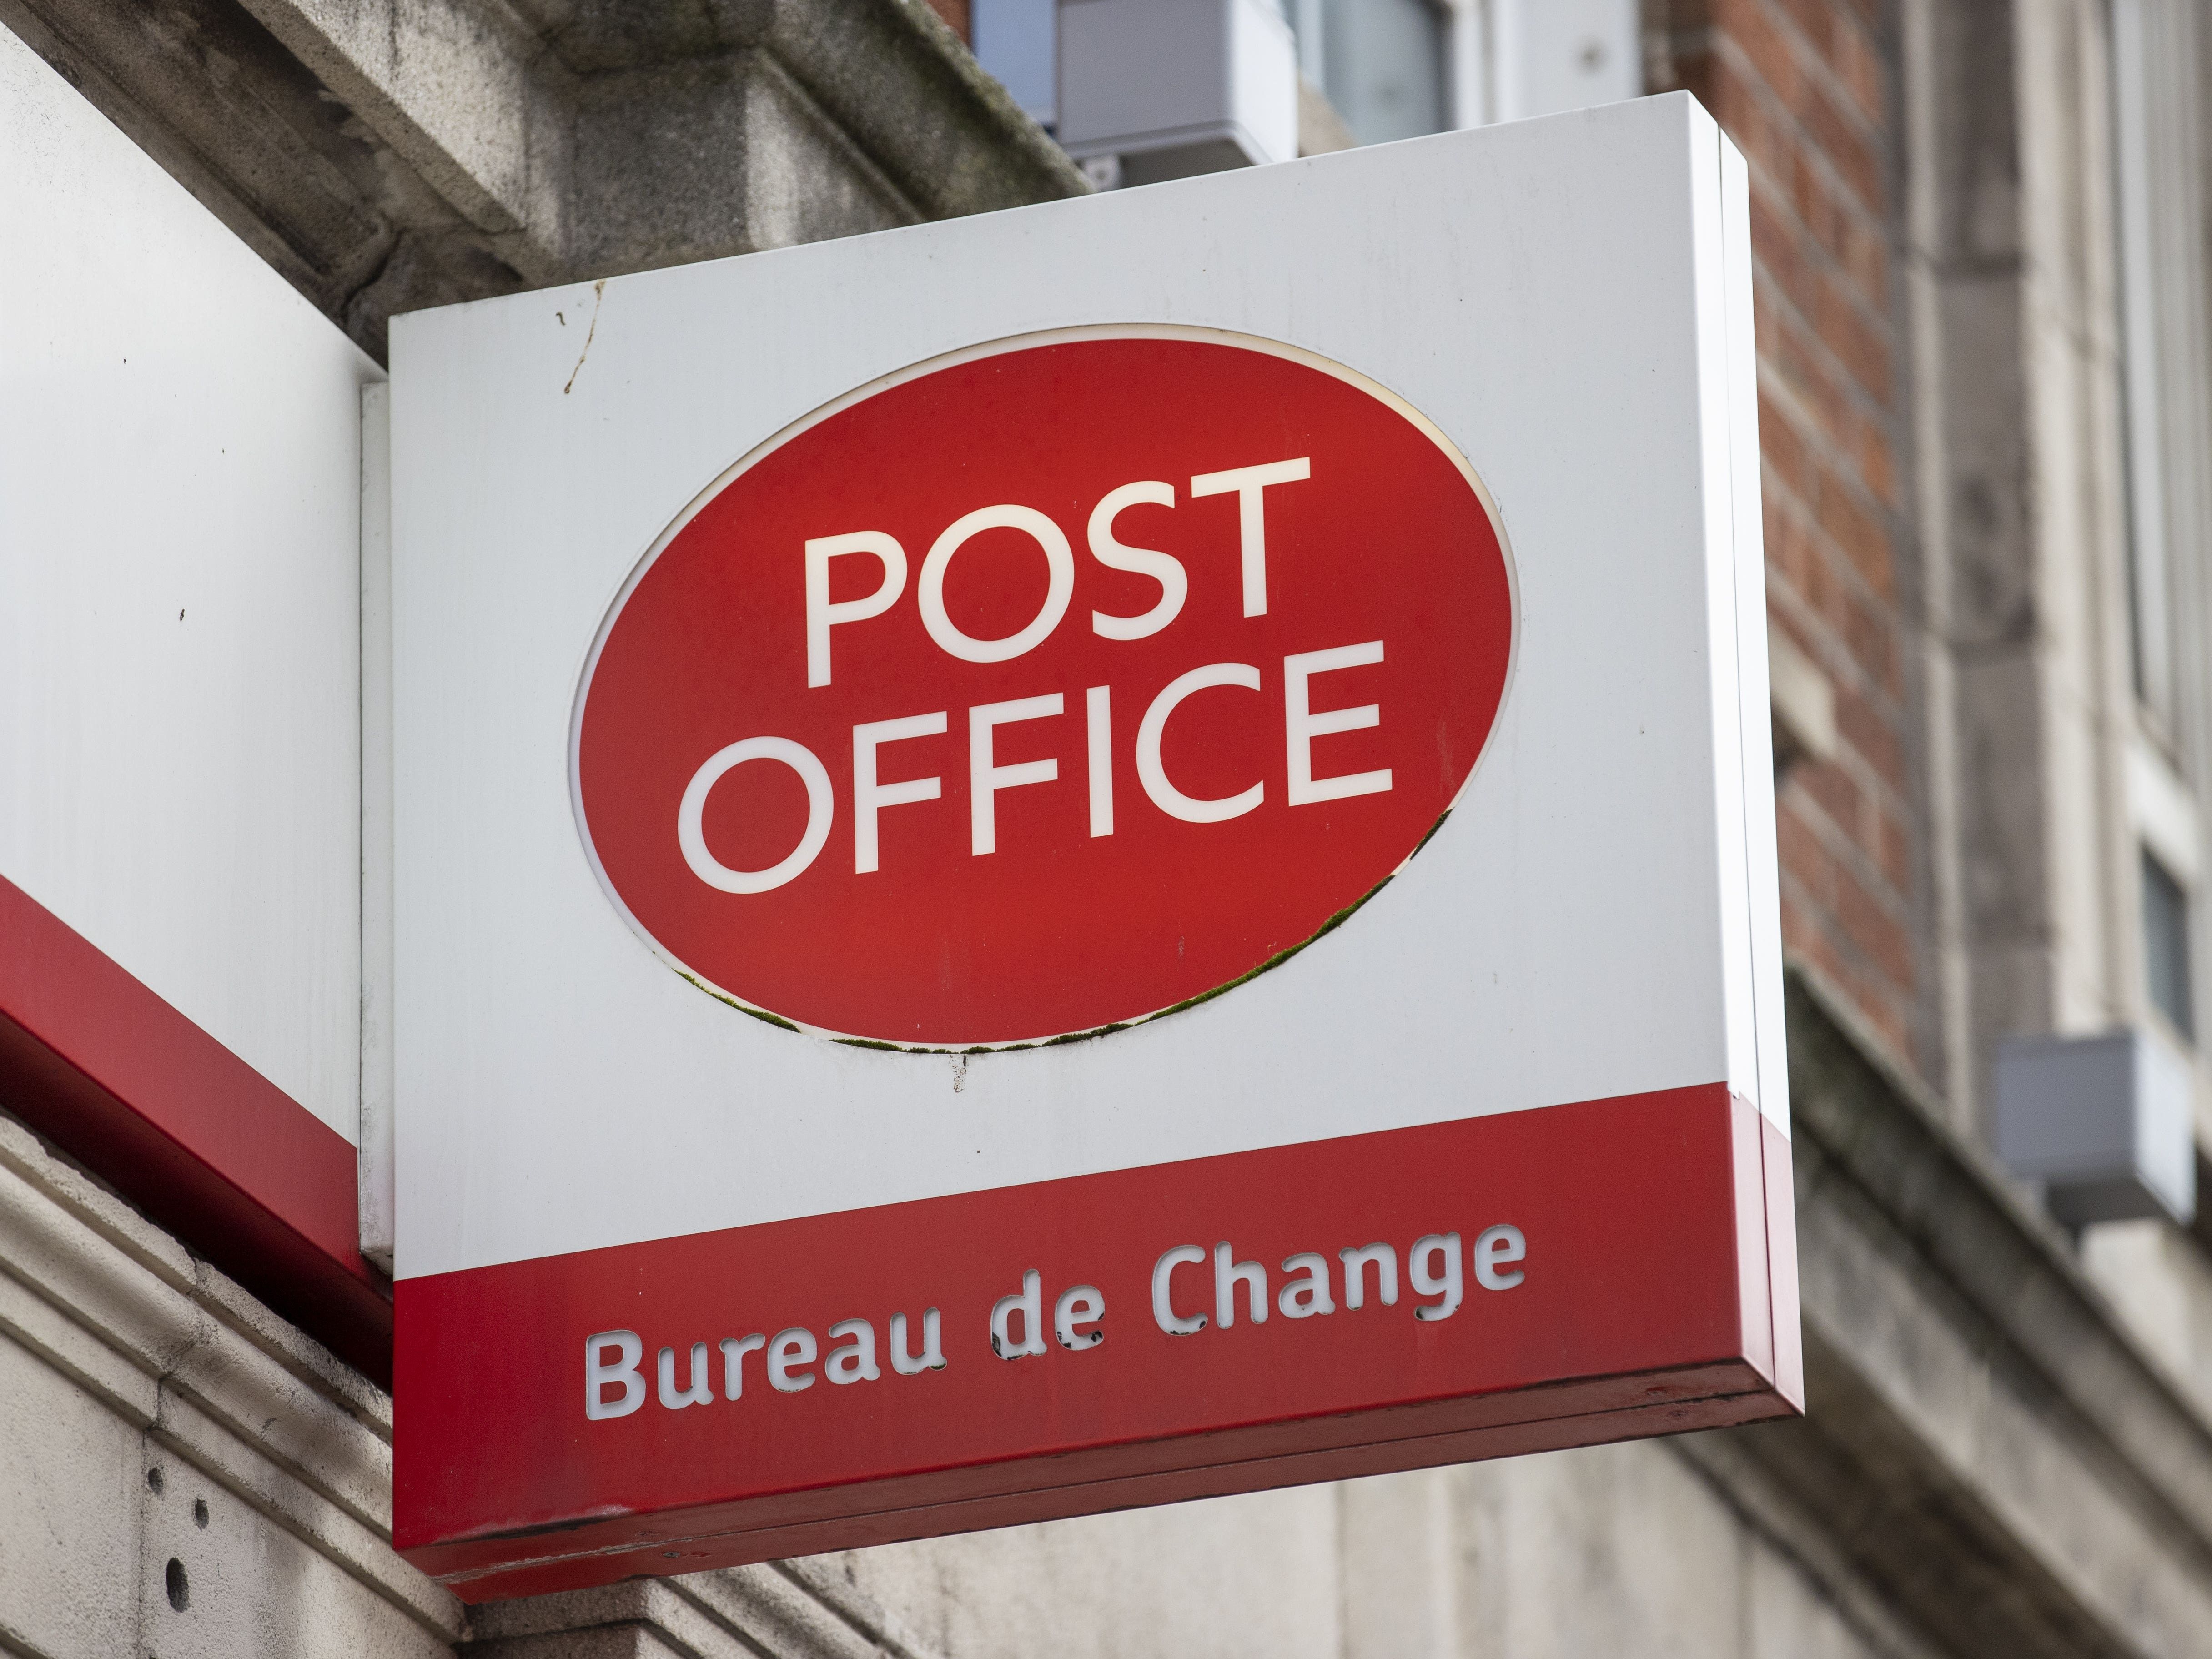 Former subpostmasters union leader ‘privately tipped off Post Office on Horizon’